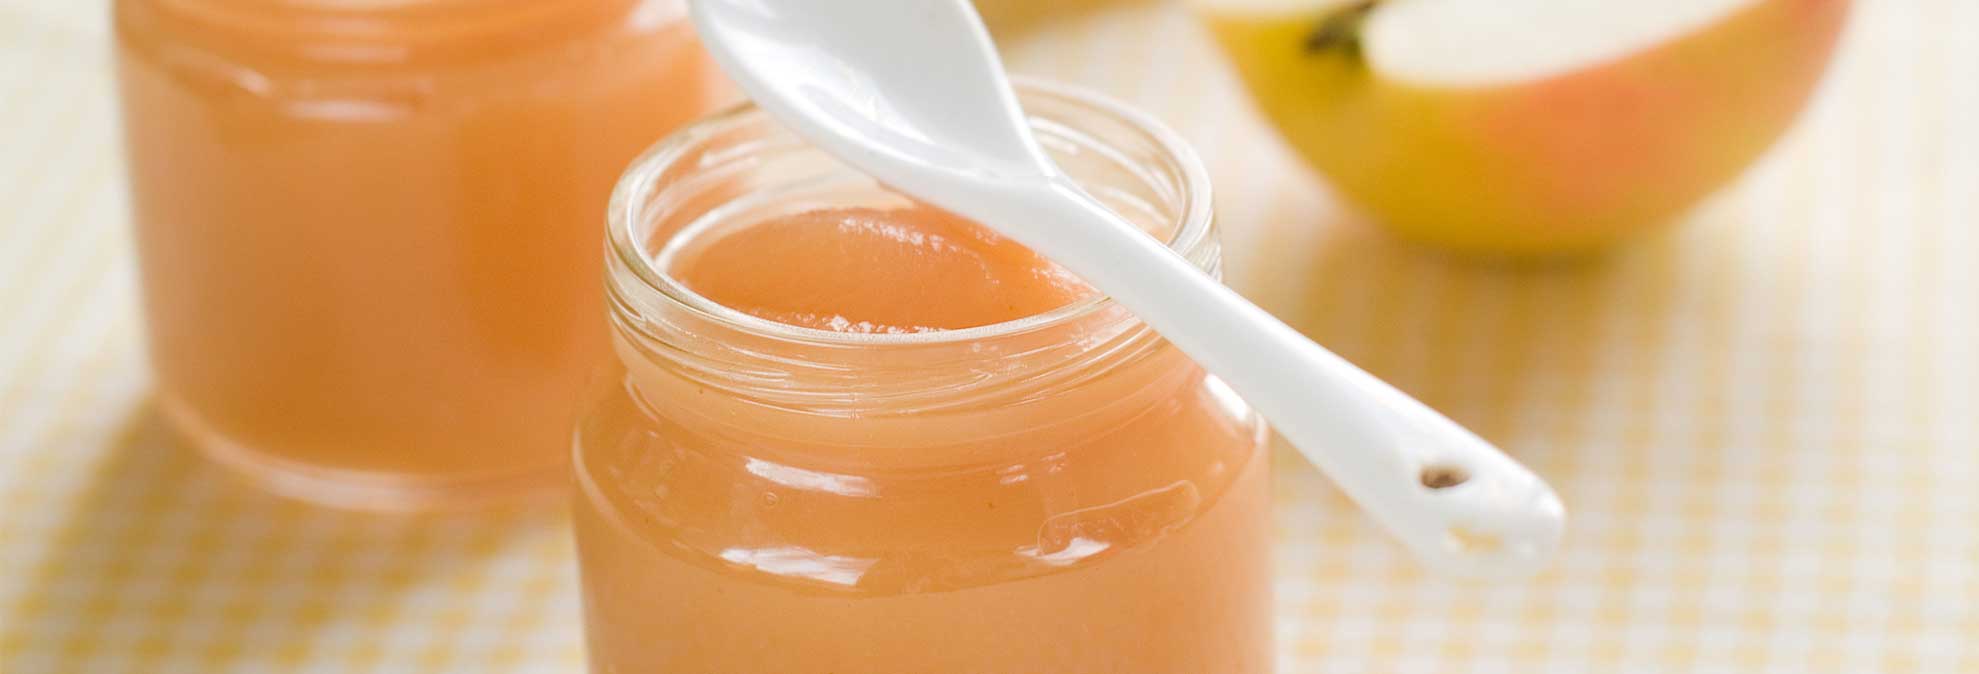 Baby Food Contaminated With Heavy Metals, Study Finds ...